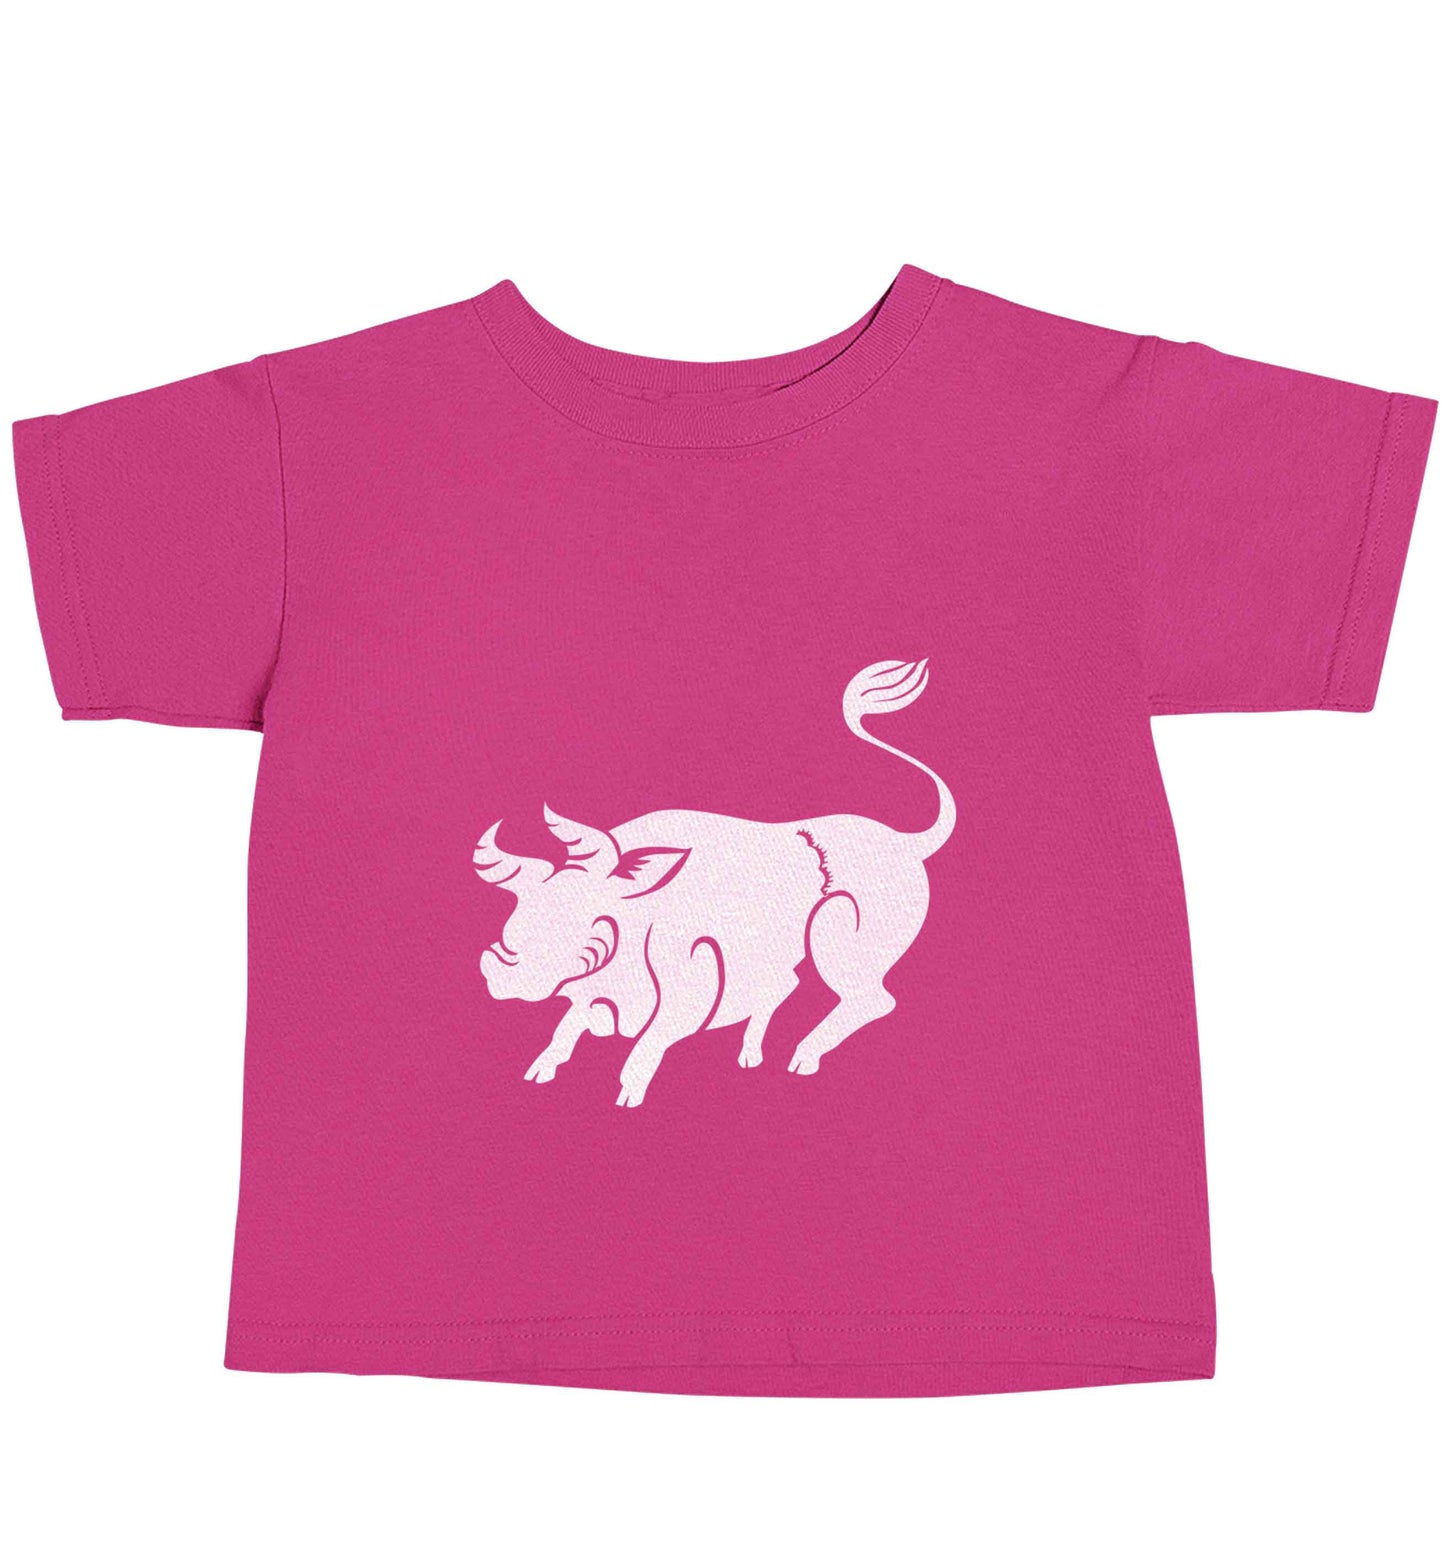 Blue ox pink baby toddler Tshirt 2 Years